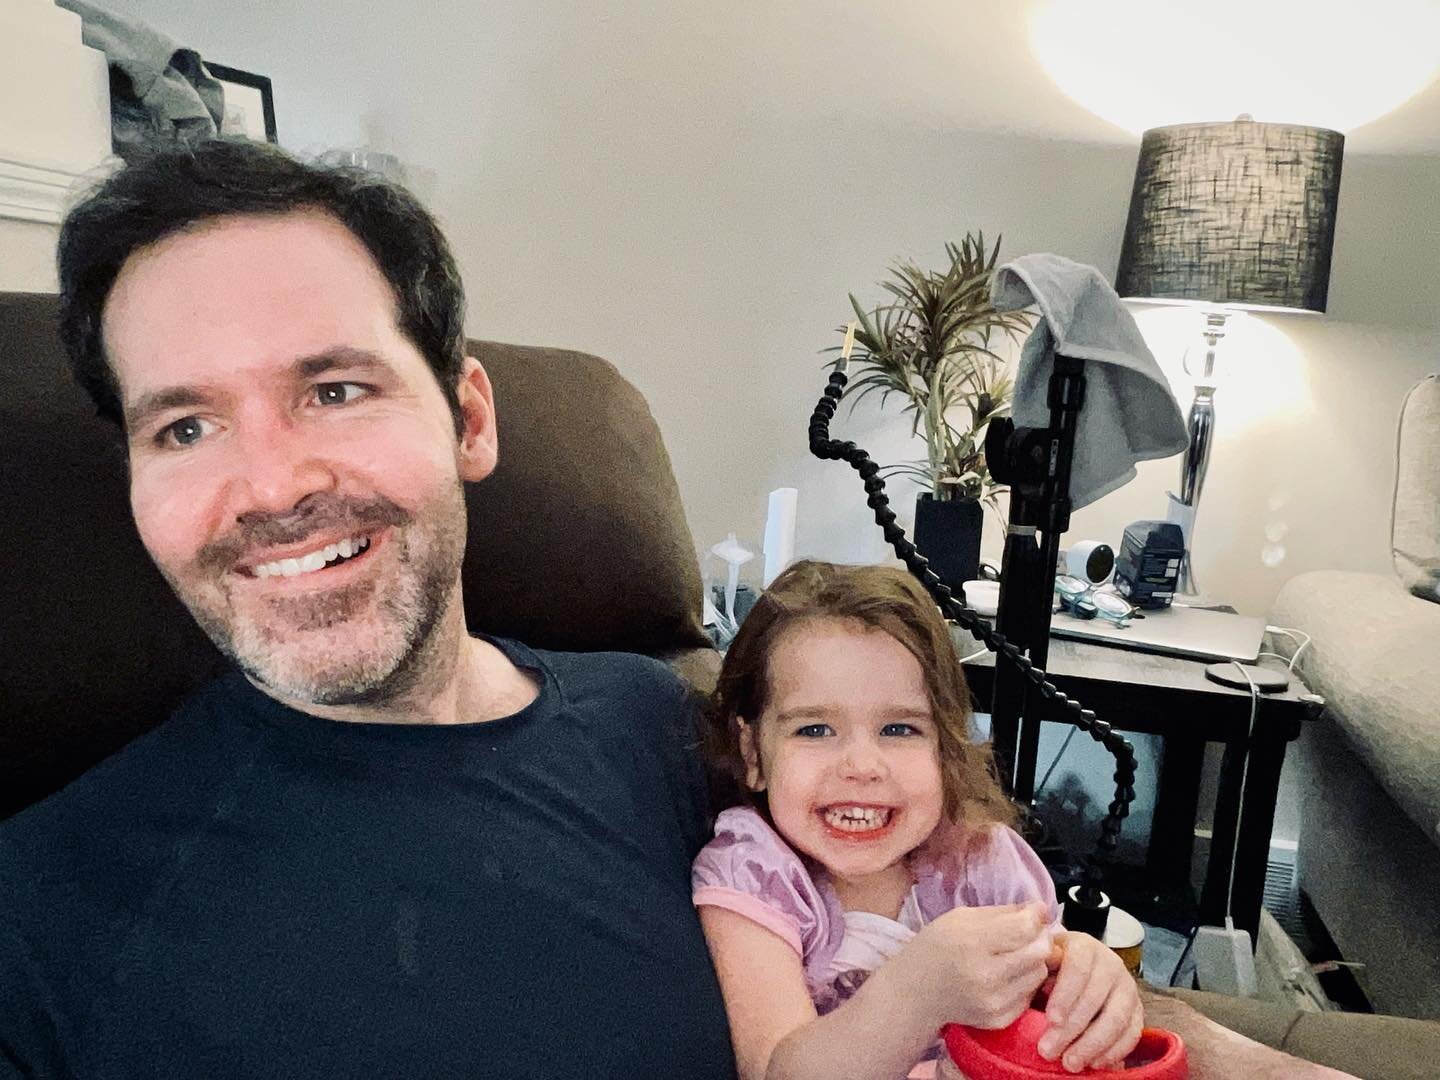 My daughter, Iris, just told me she can&rsquo;t wait to play with me after I get better 😢. She&rsquo;s super confused why it&rsquo;s taking me so long getting over being &quot;sick&rdquo; though. That&rsquo;d be a question I&rsquo;d love the FDA to 